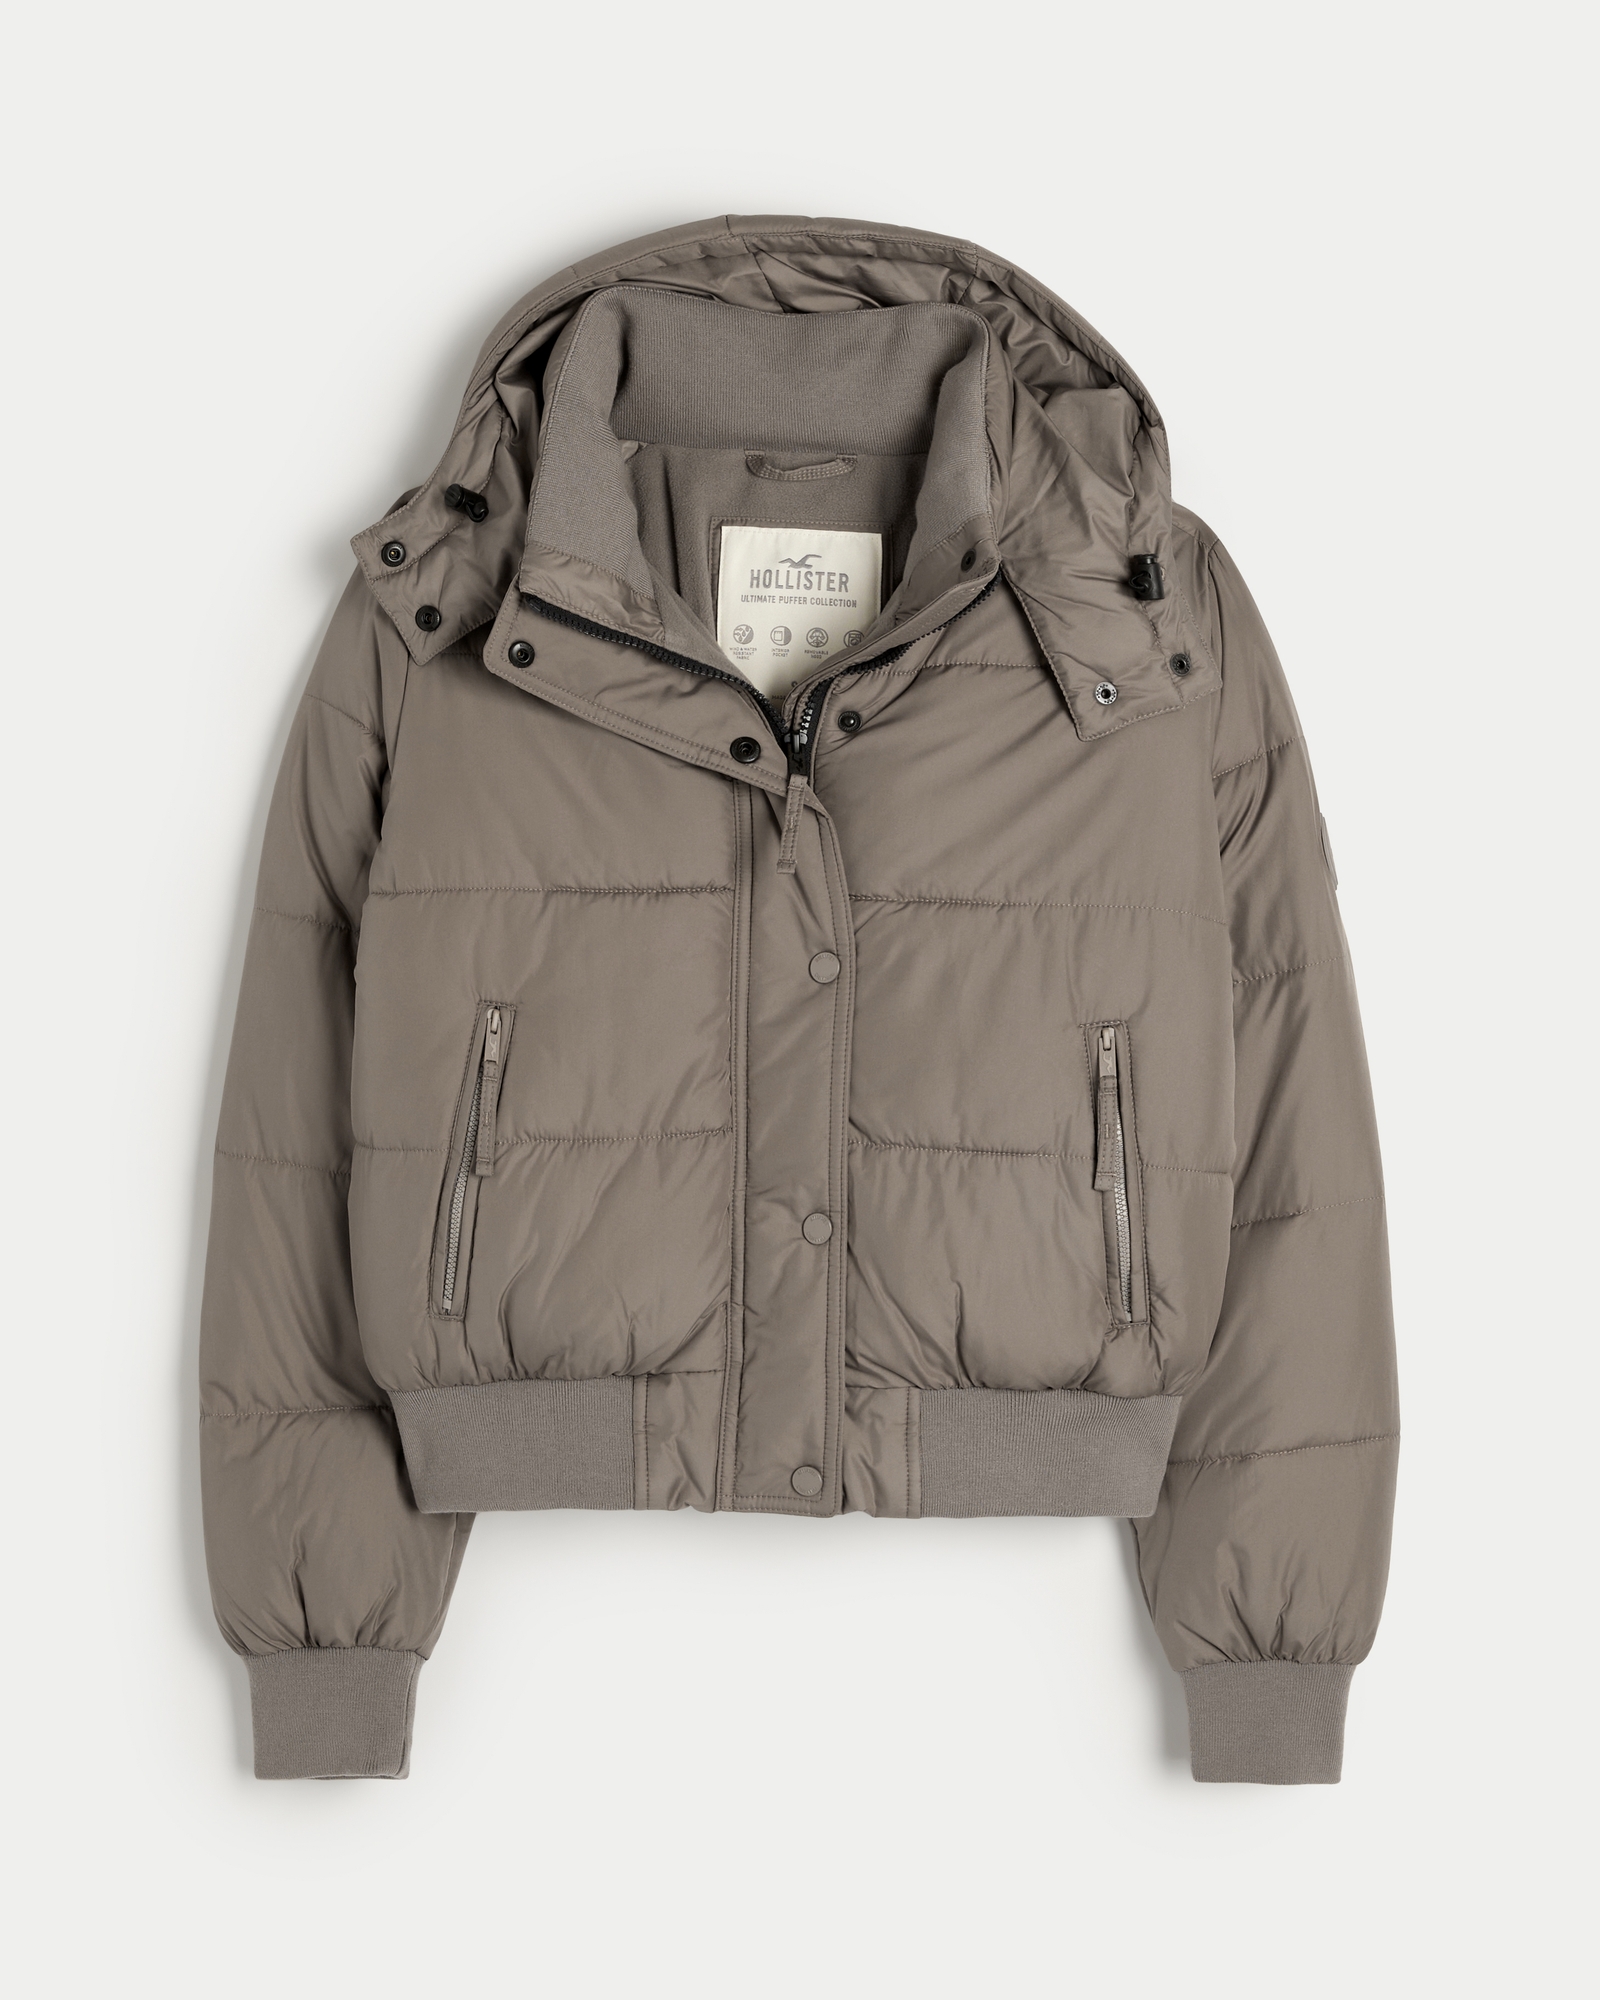 Top Picks From Hollister's 25%-Off Puffer Jacket Sale